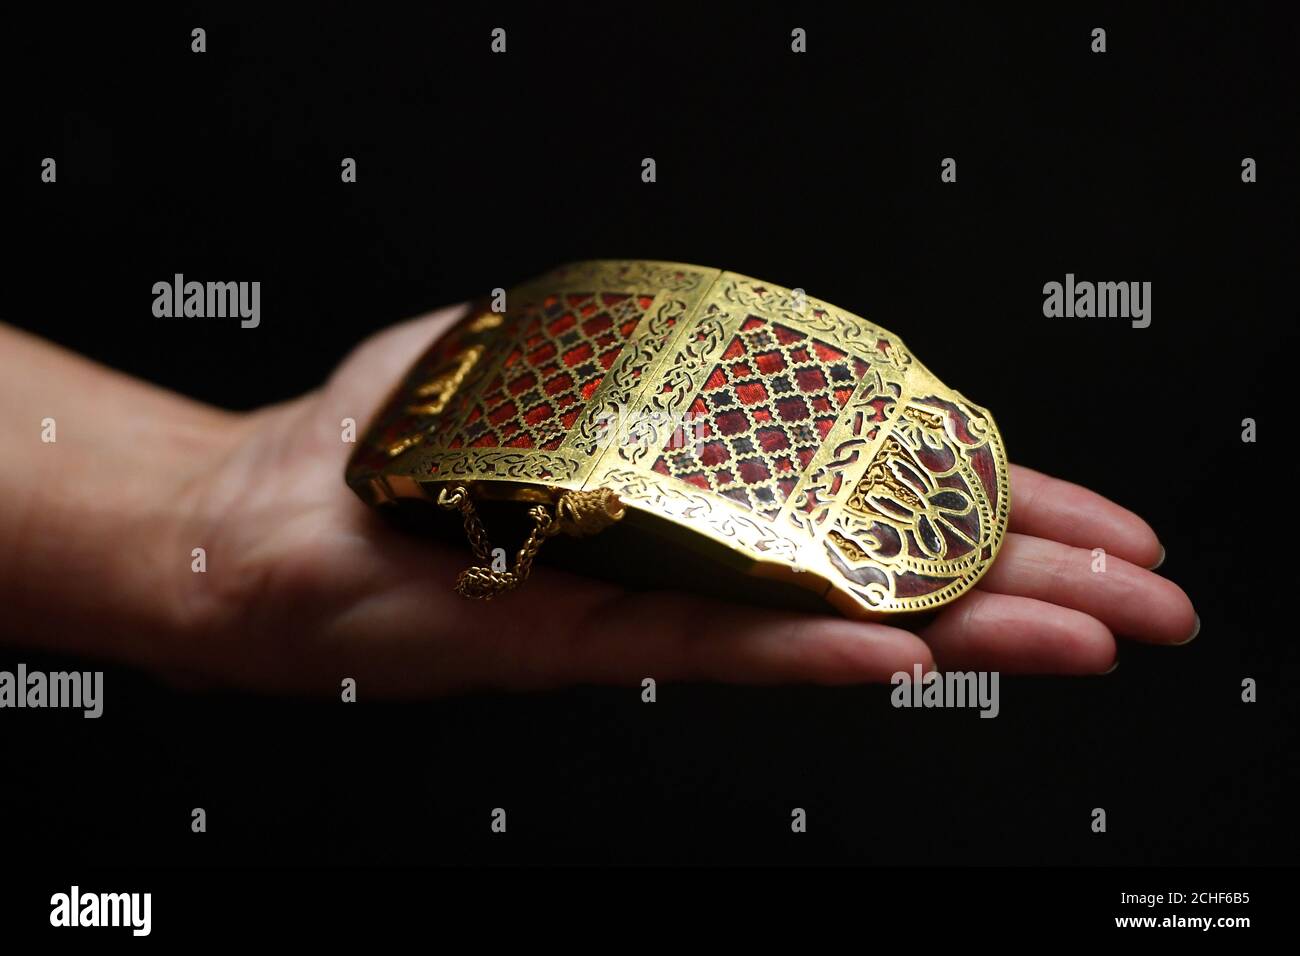 A replica of an ornate shoulder clasp, believed to have belonged to King Raedwald of East Anglia, on display in the new exhibition at the National Trust's Sutton Hoo site in Suffolk following a ??4m revamp. Stock Photo